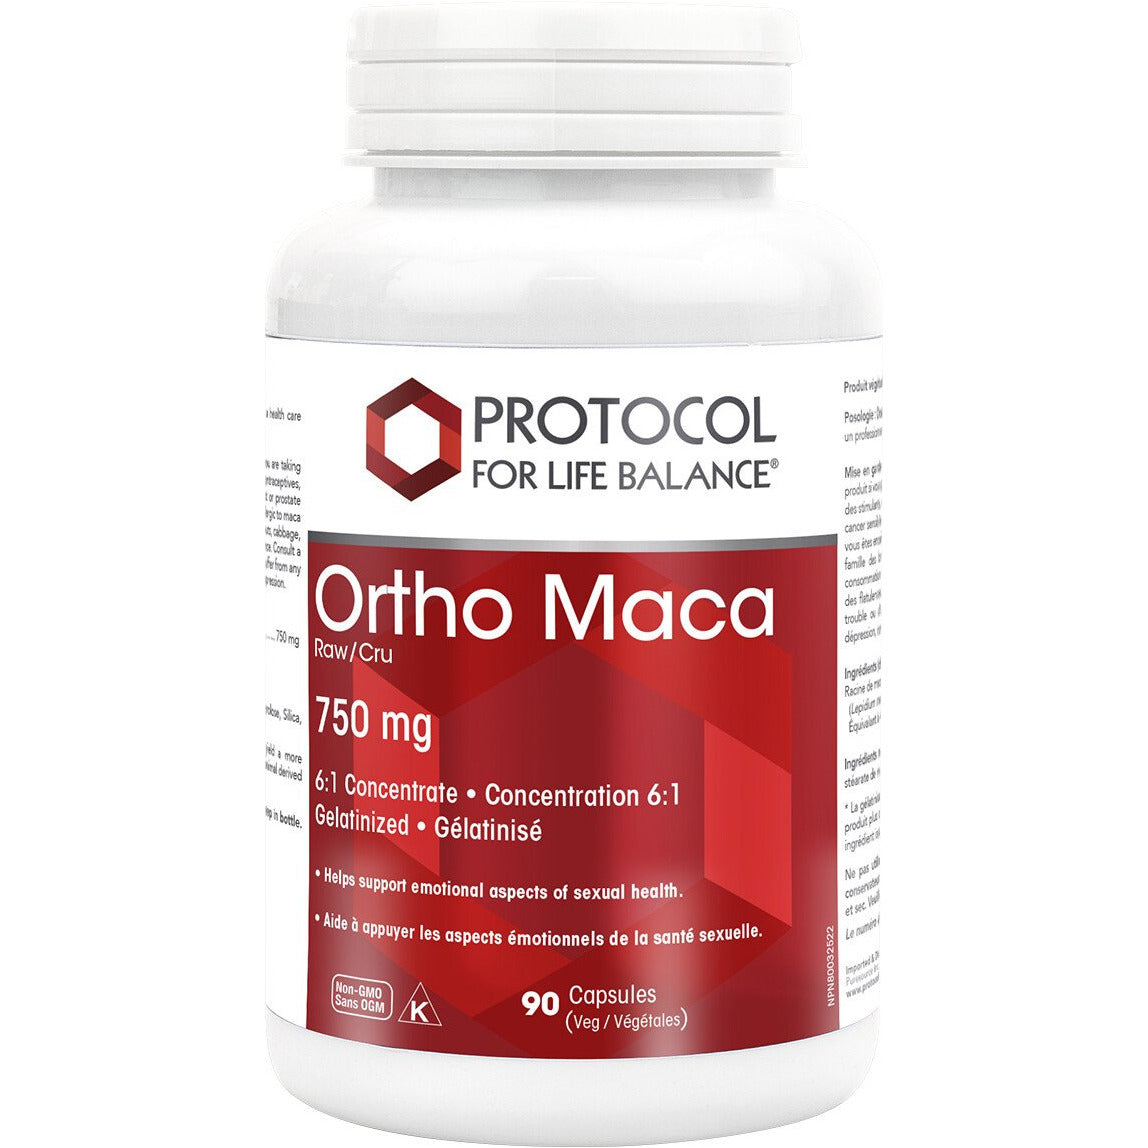 Ortho Maca Raw 750 mg 6:1 Concentrate 90 vcaps